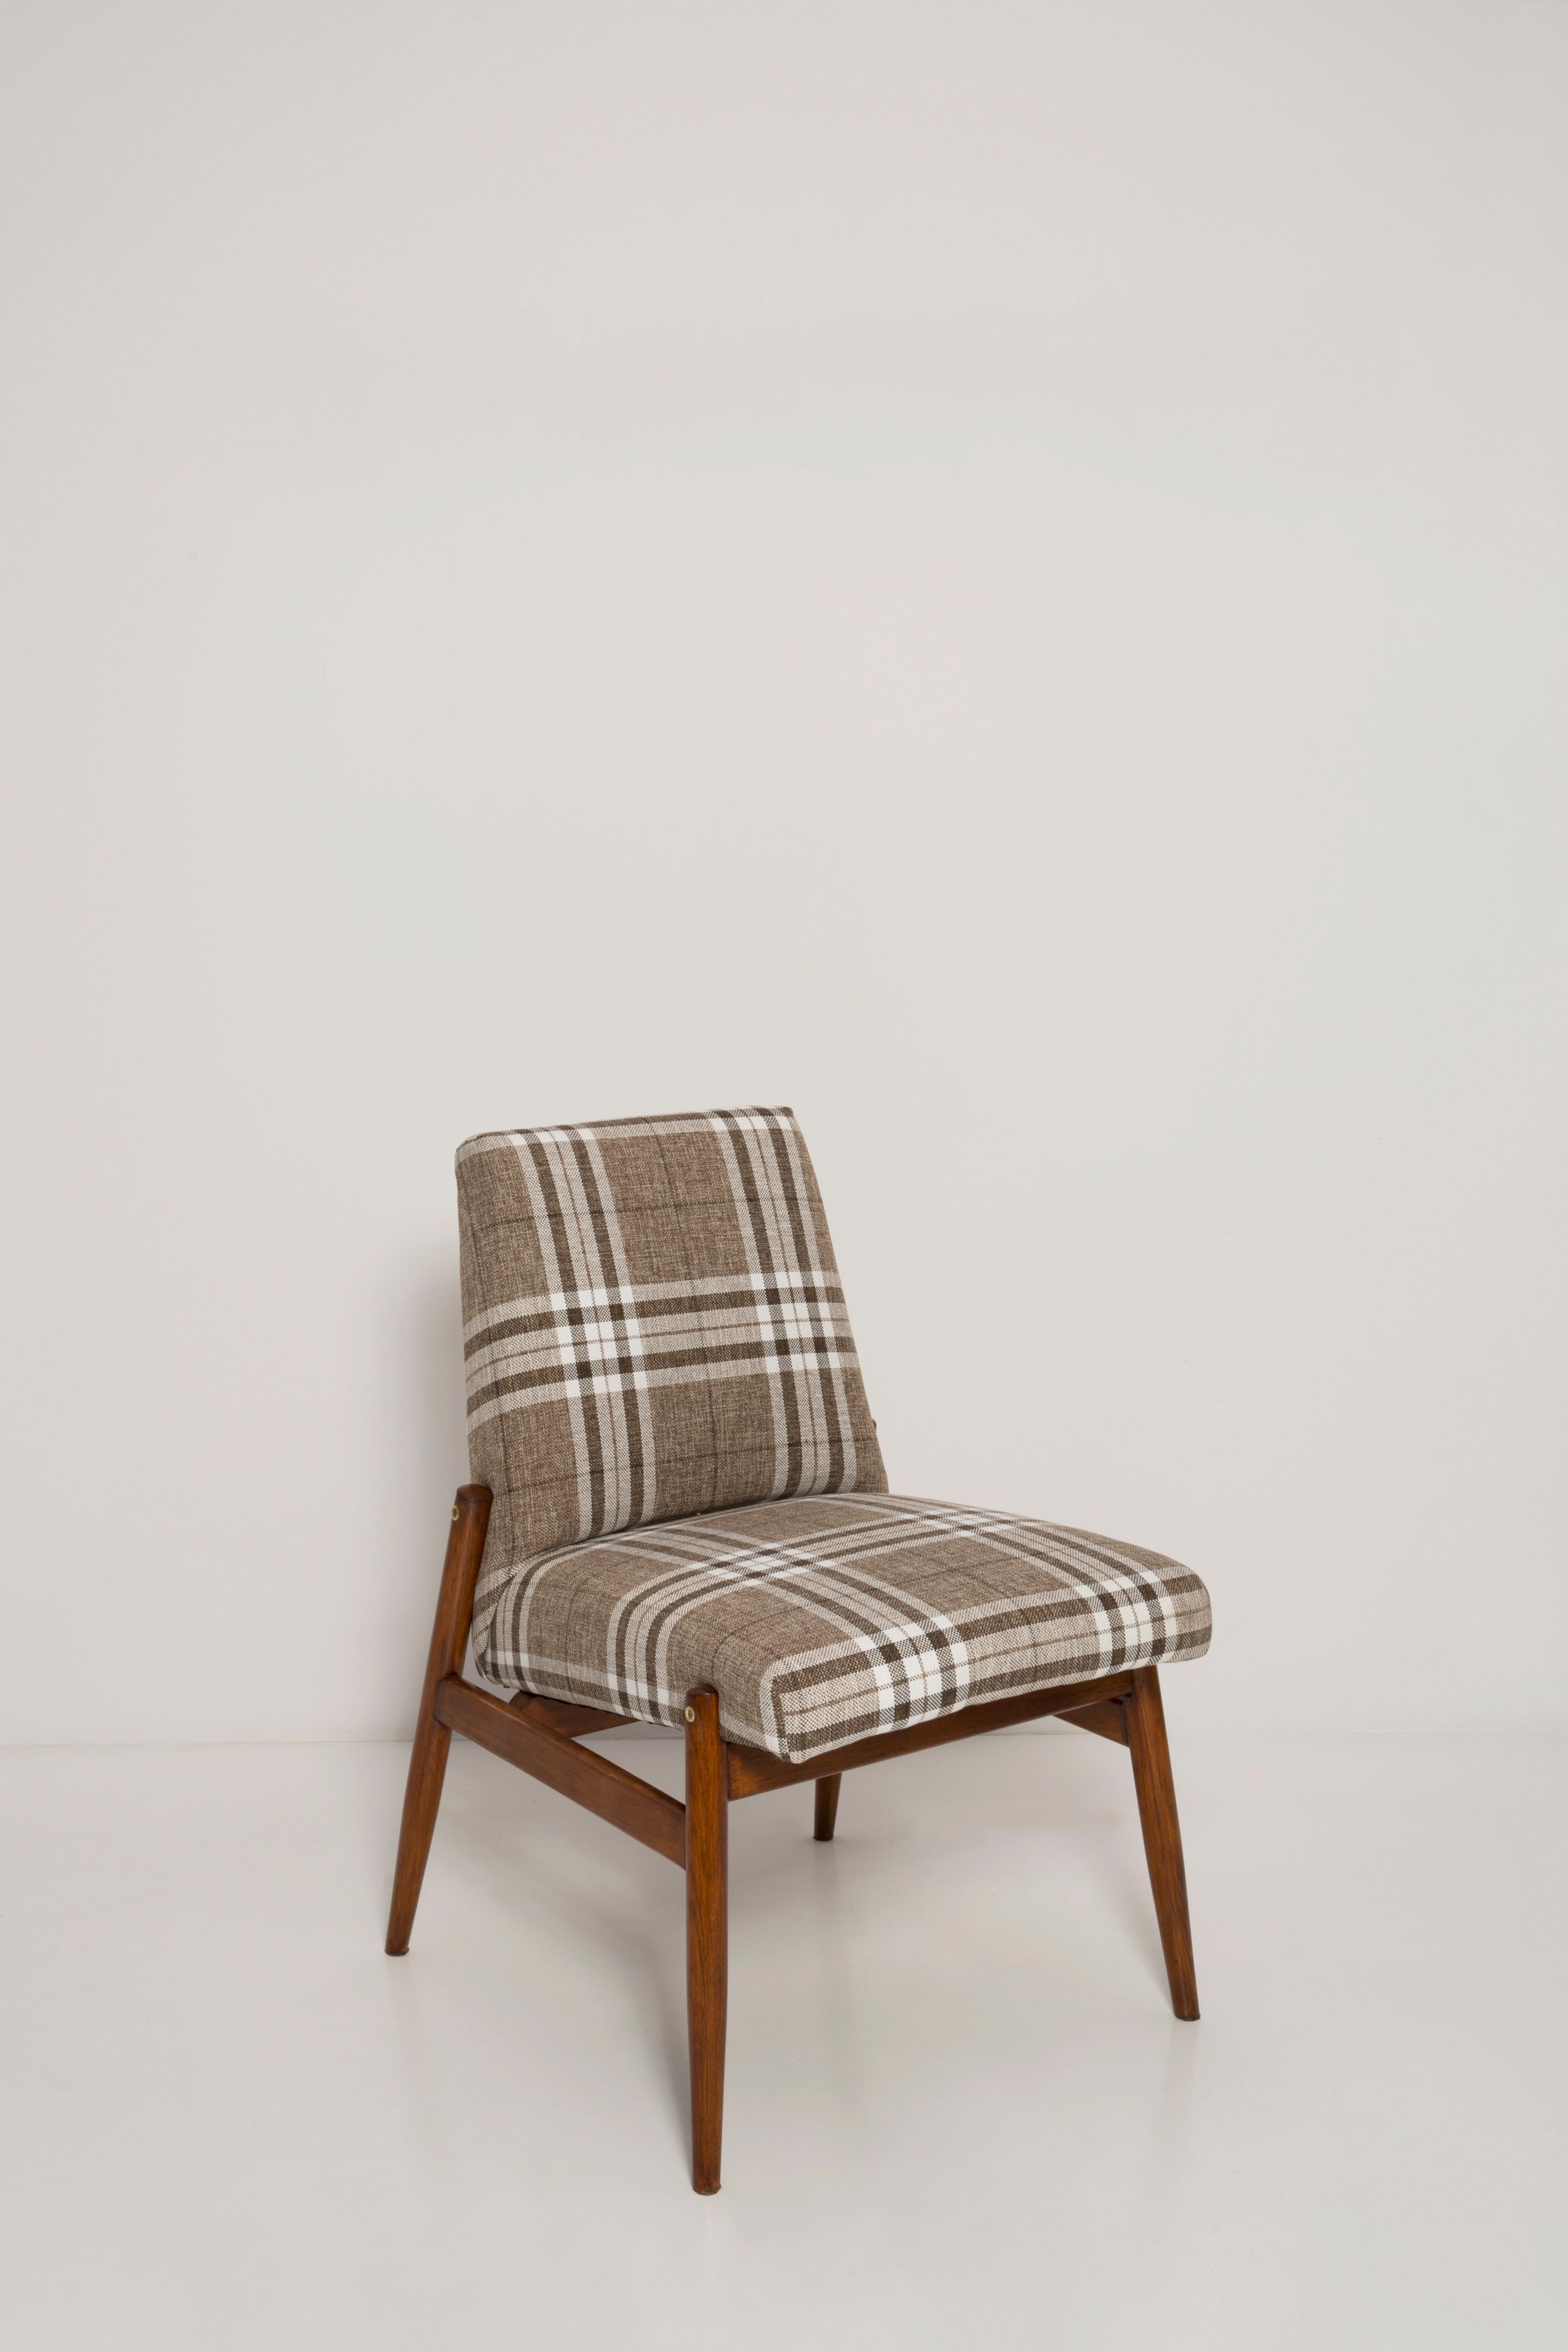 20th Century Beige Checkered Fabric Armchair, 300-227 Type, Europe, 1960s For Sale 1